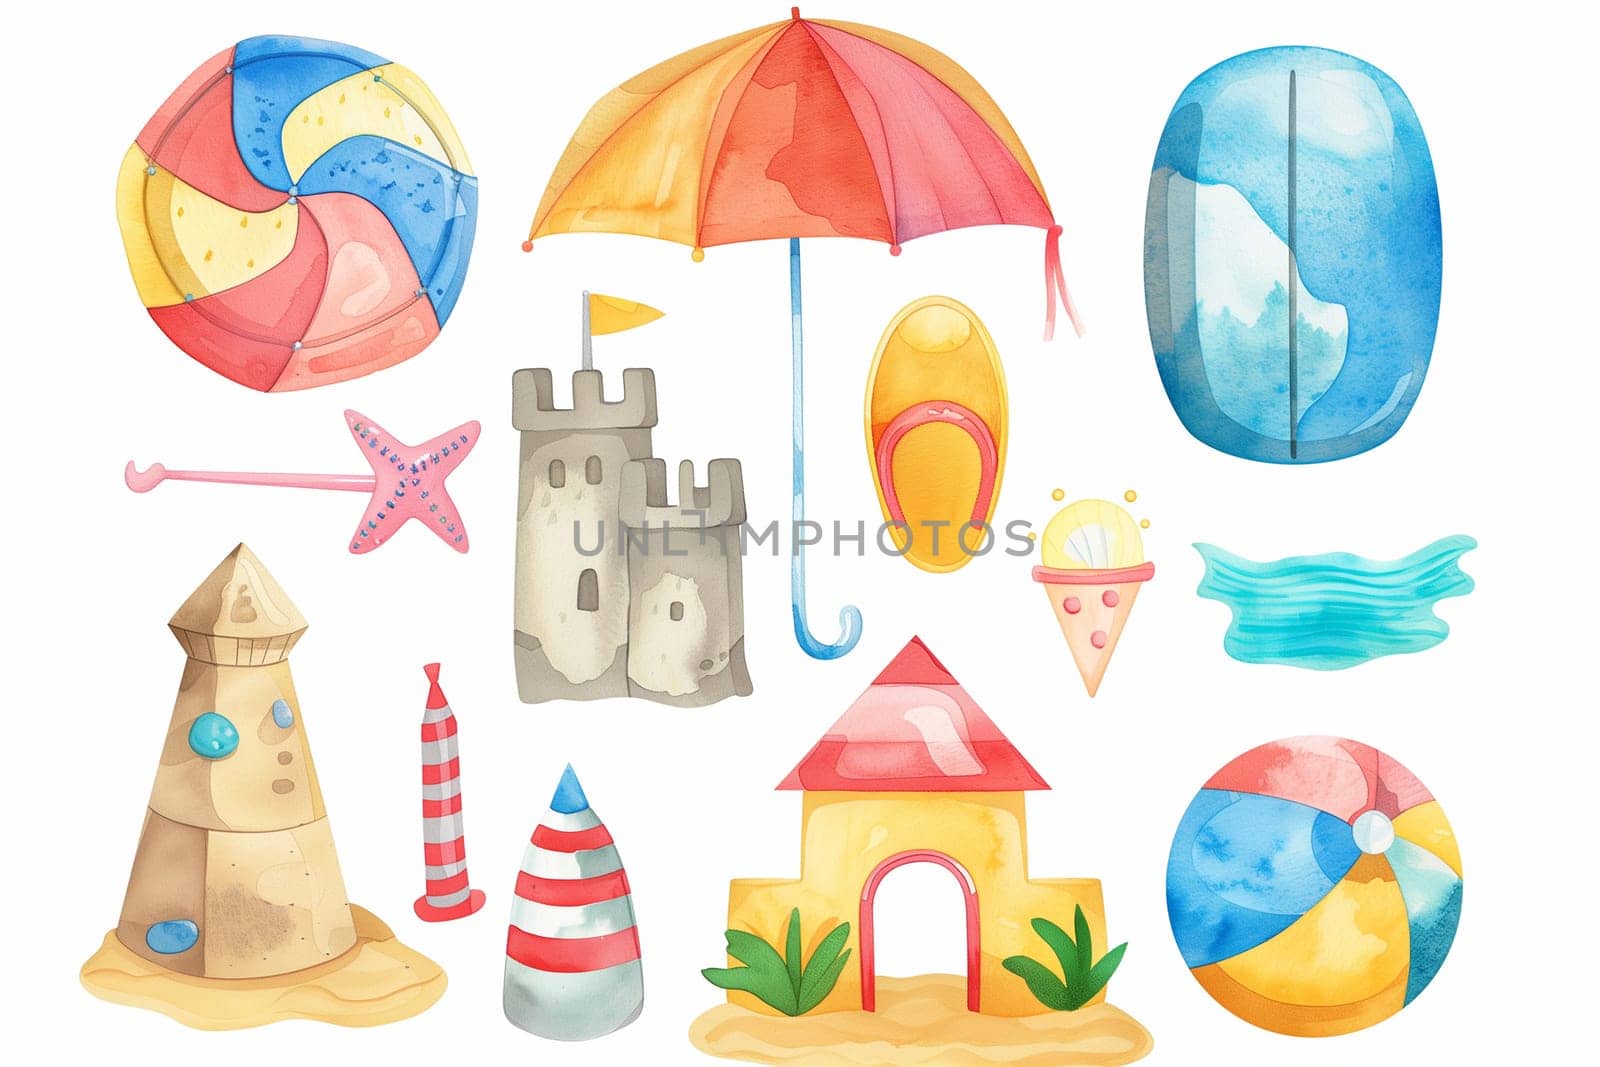 A watercolor illustration featuring umbrellas, sandcastles, and a starfish on a beach.